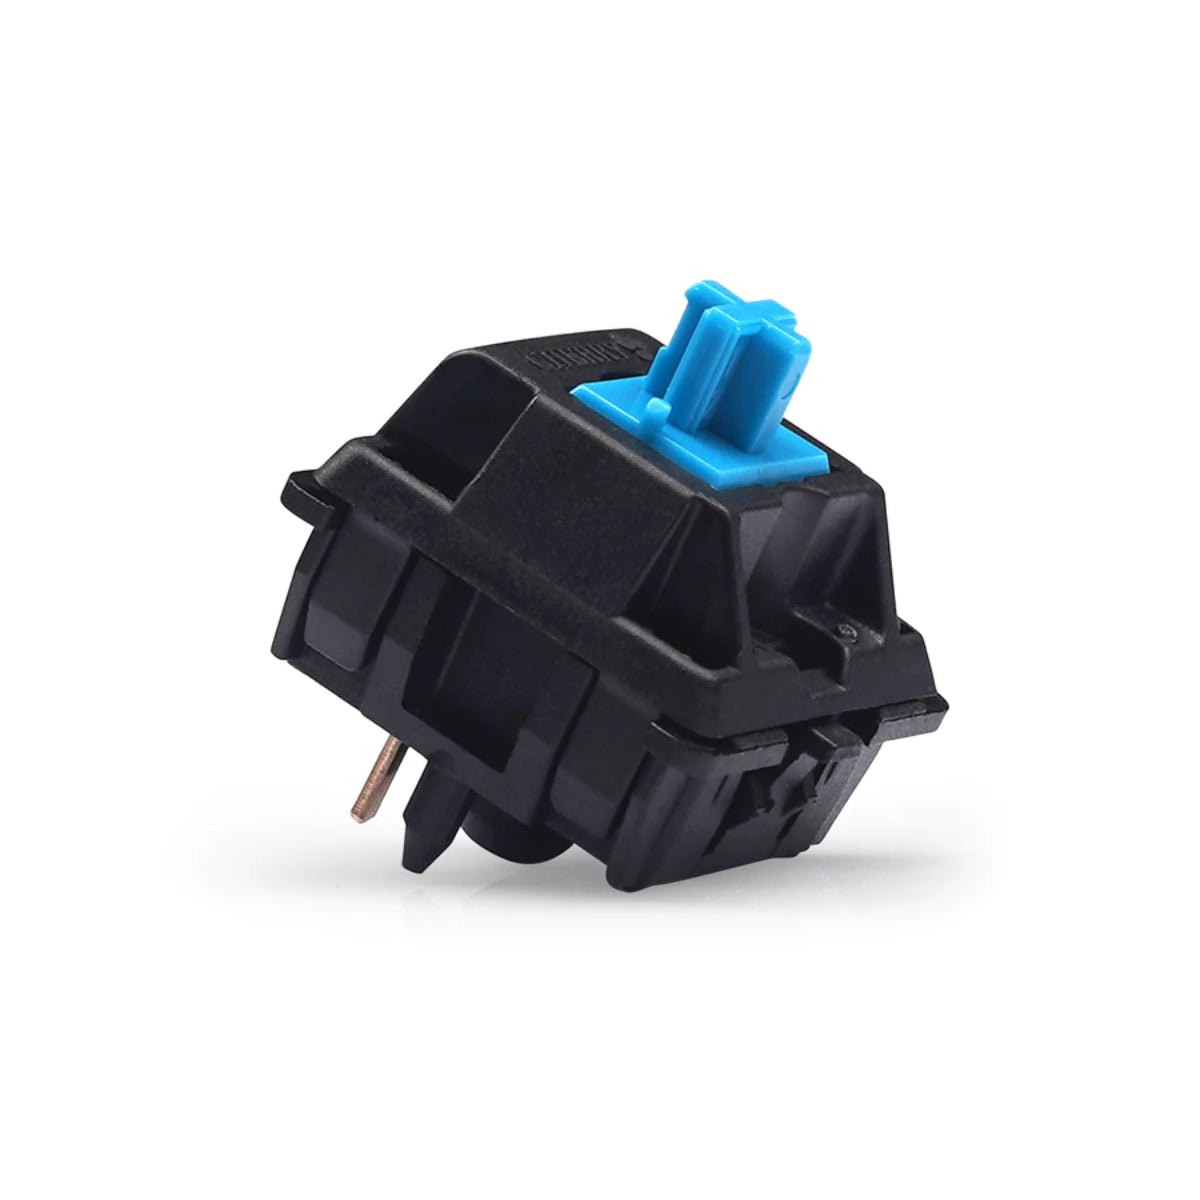 KBD Fans Cherry MX Hyperglide Tactile Switches - Blue - Store 974 | ستور ٩٧٤